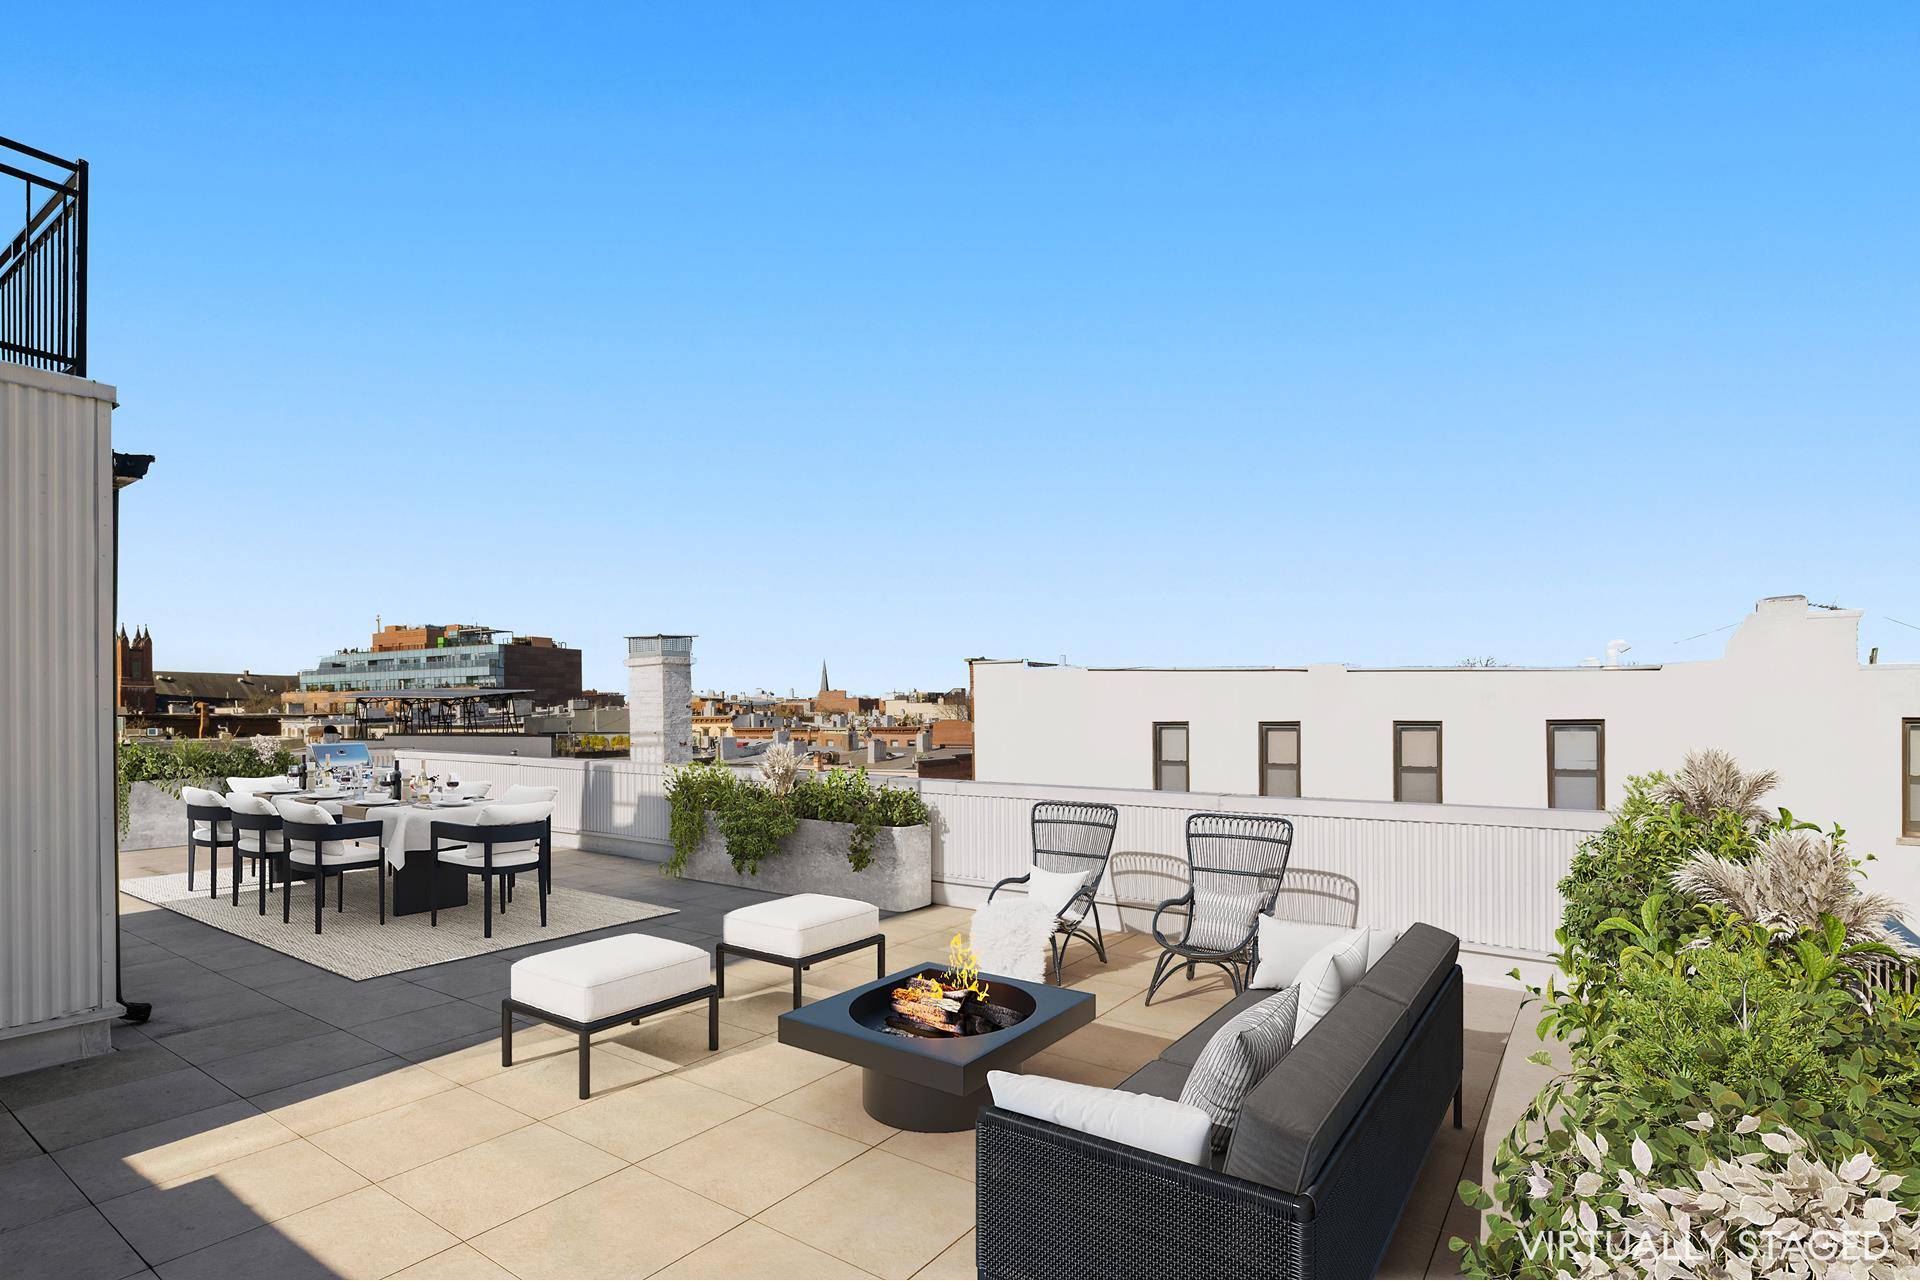 Spanning over 2, 400 square feet in total, designer interiors and an enormous private roof deck await in this radiant three bedroom, two bathroom condo located on one of Cobble ...